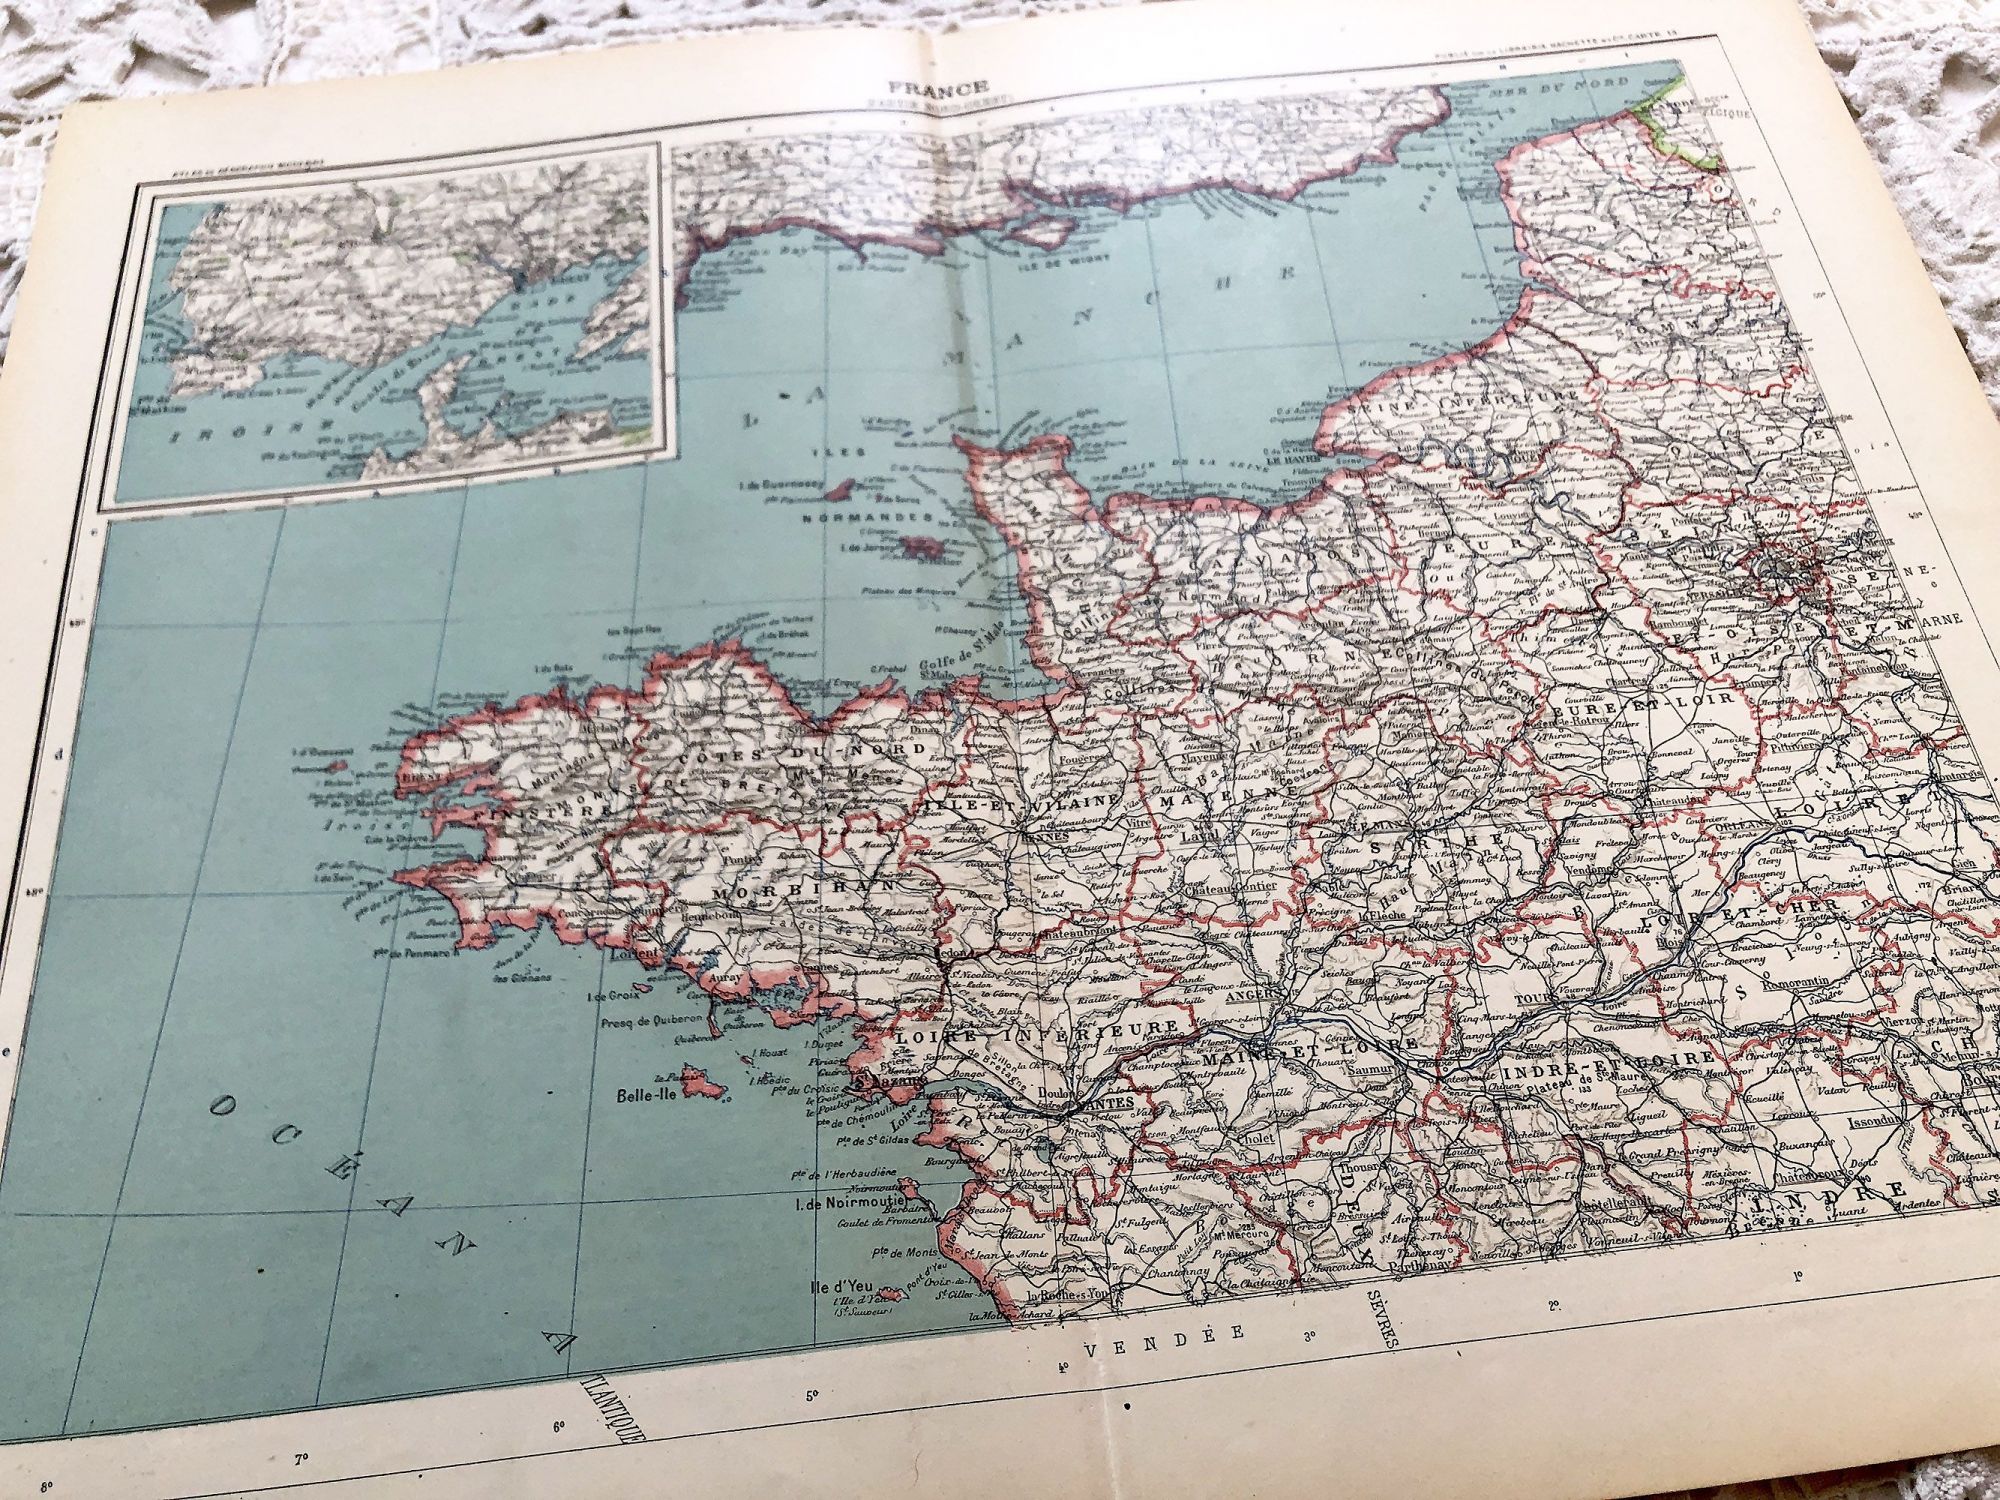 Large vintage map of north-west of France and Brest harbor from a French atlas of the 1910s